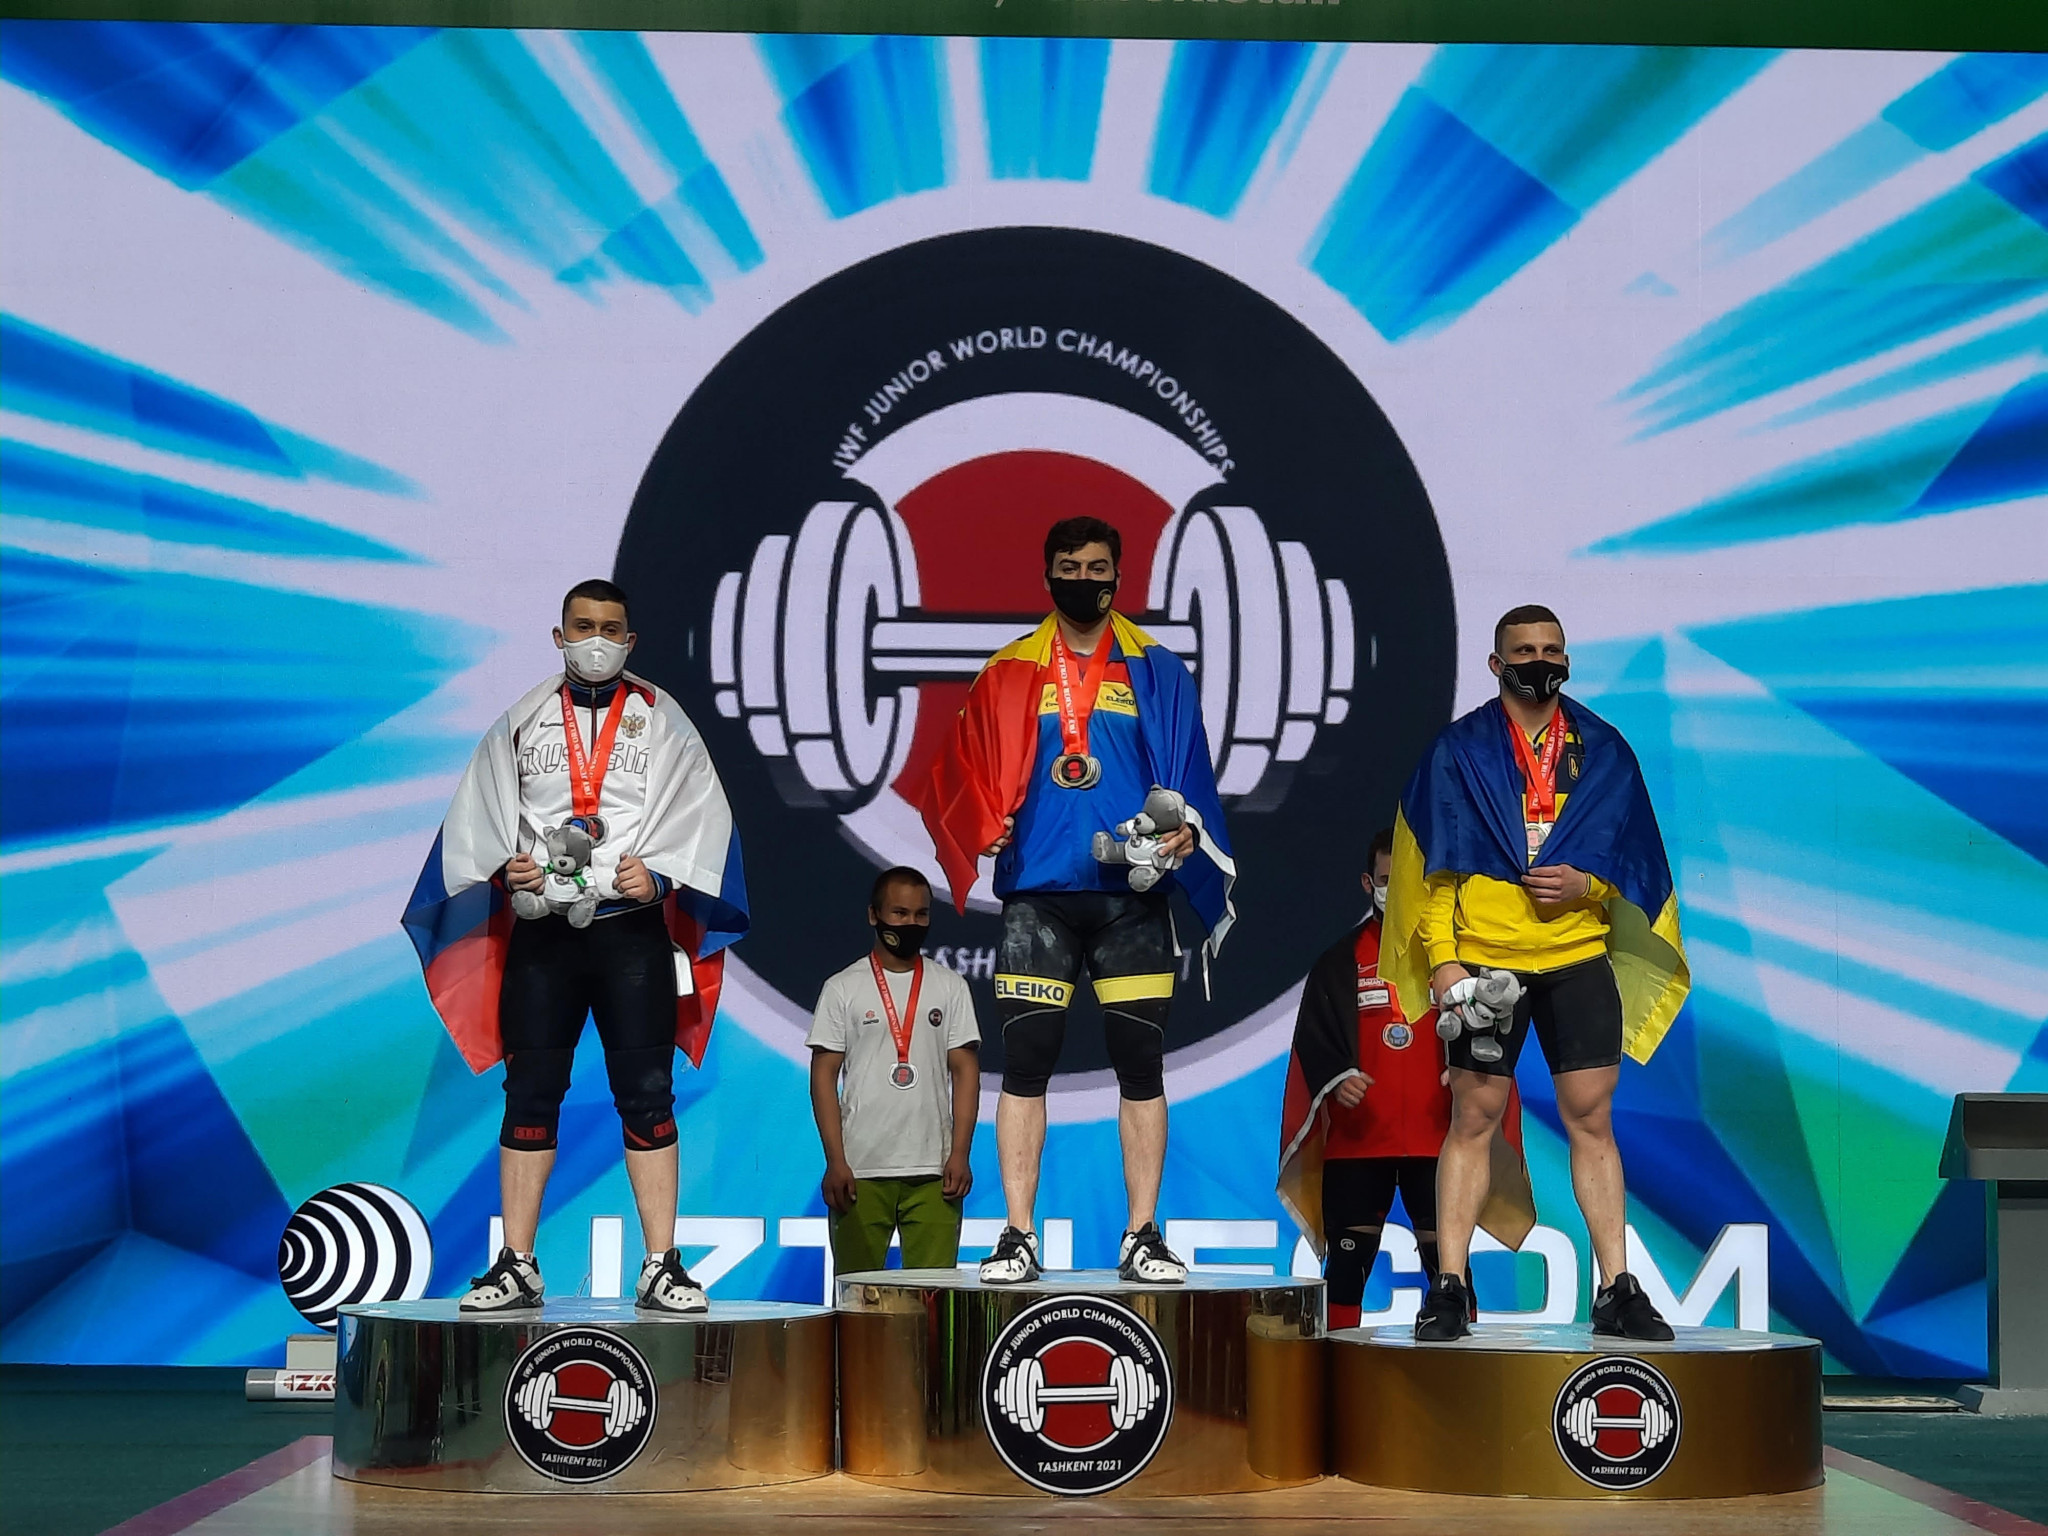 Weightlifting glory for Russia and Moldova at Junior World Championships